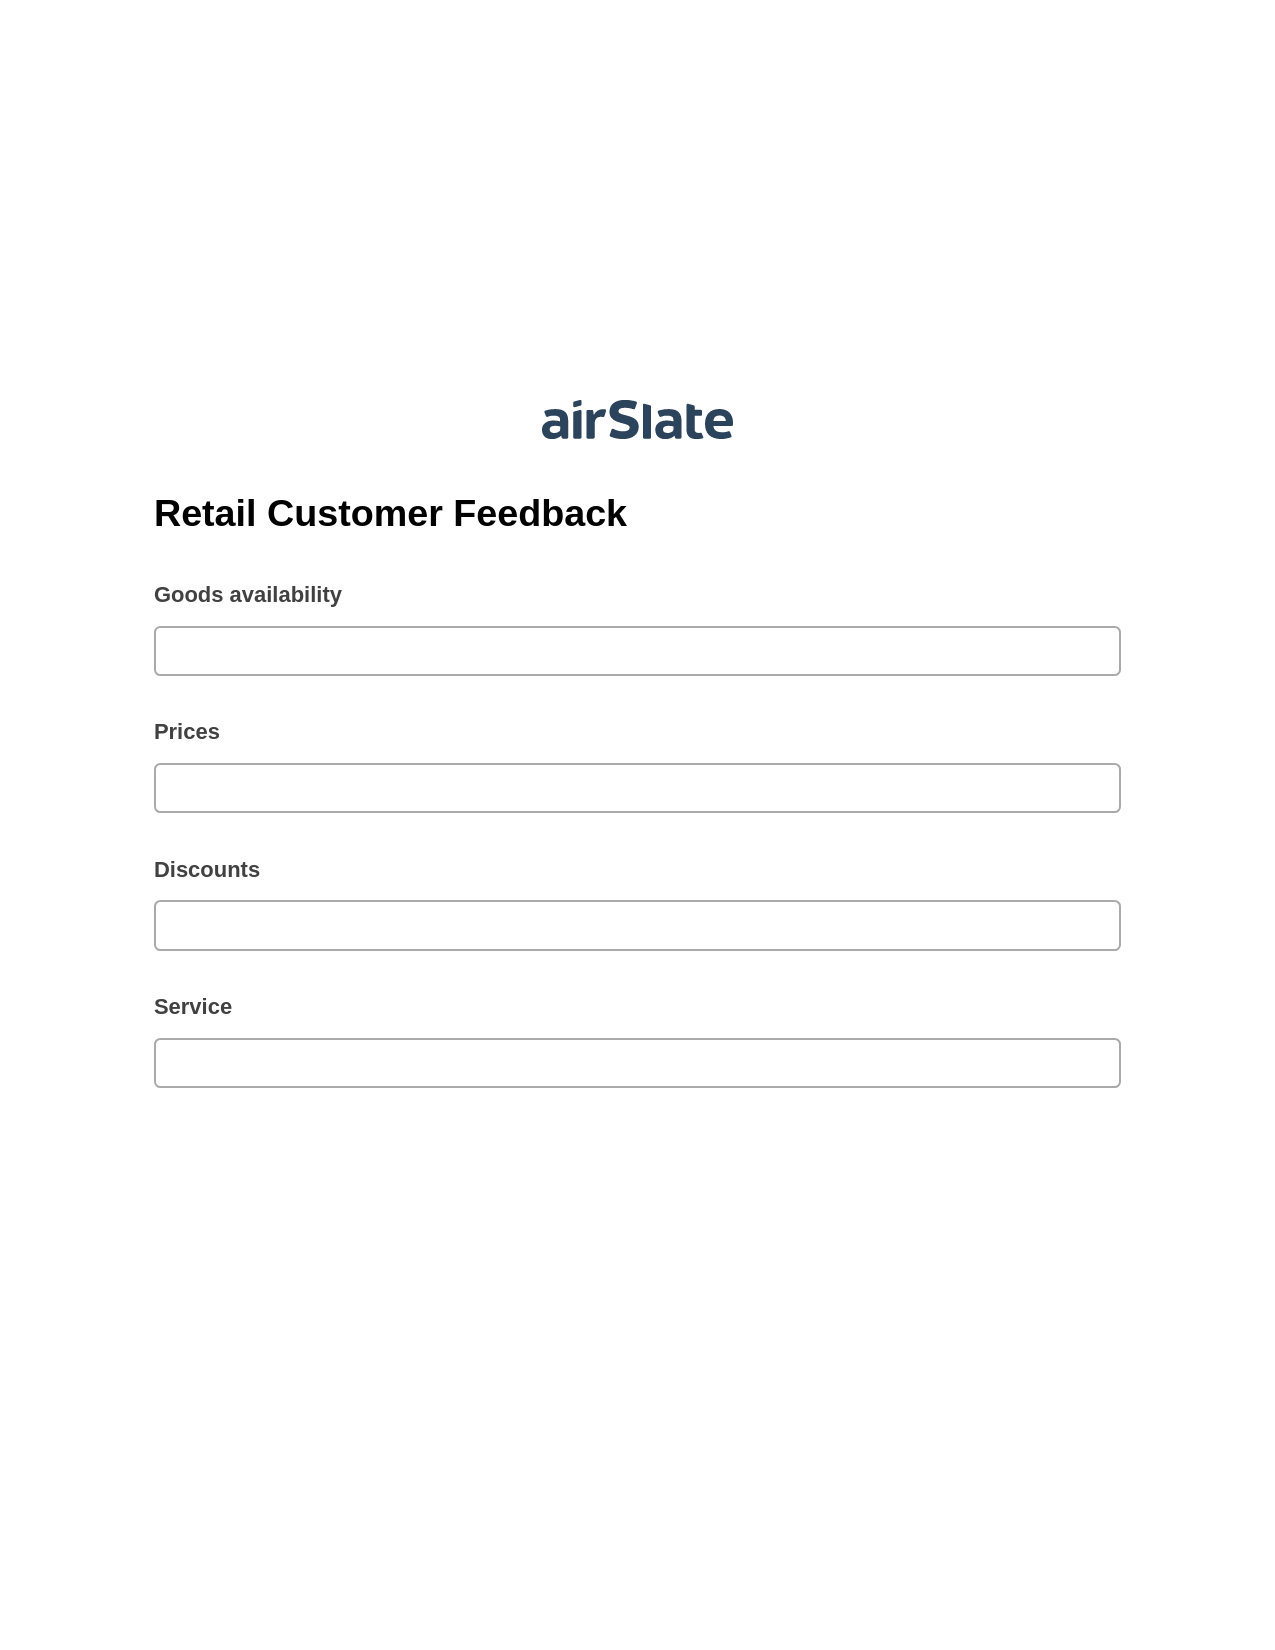 Retail Customer Feedback Pre-fill from NetSuite Records Bot, Update NetSuite Records Bot, Archive to SharePoint Folder Bot